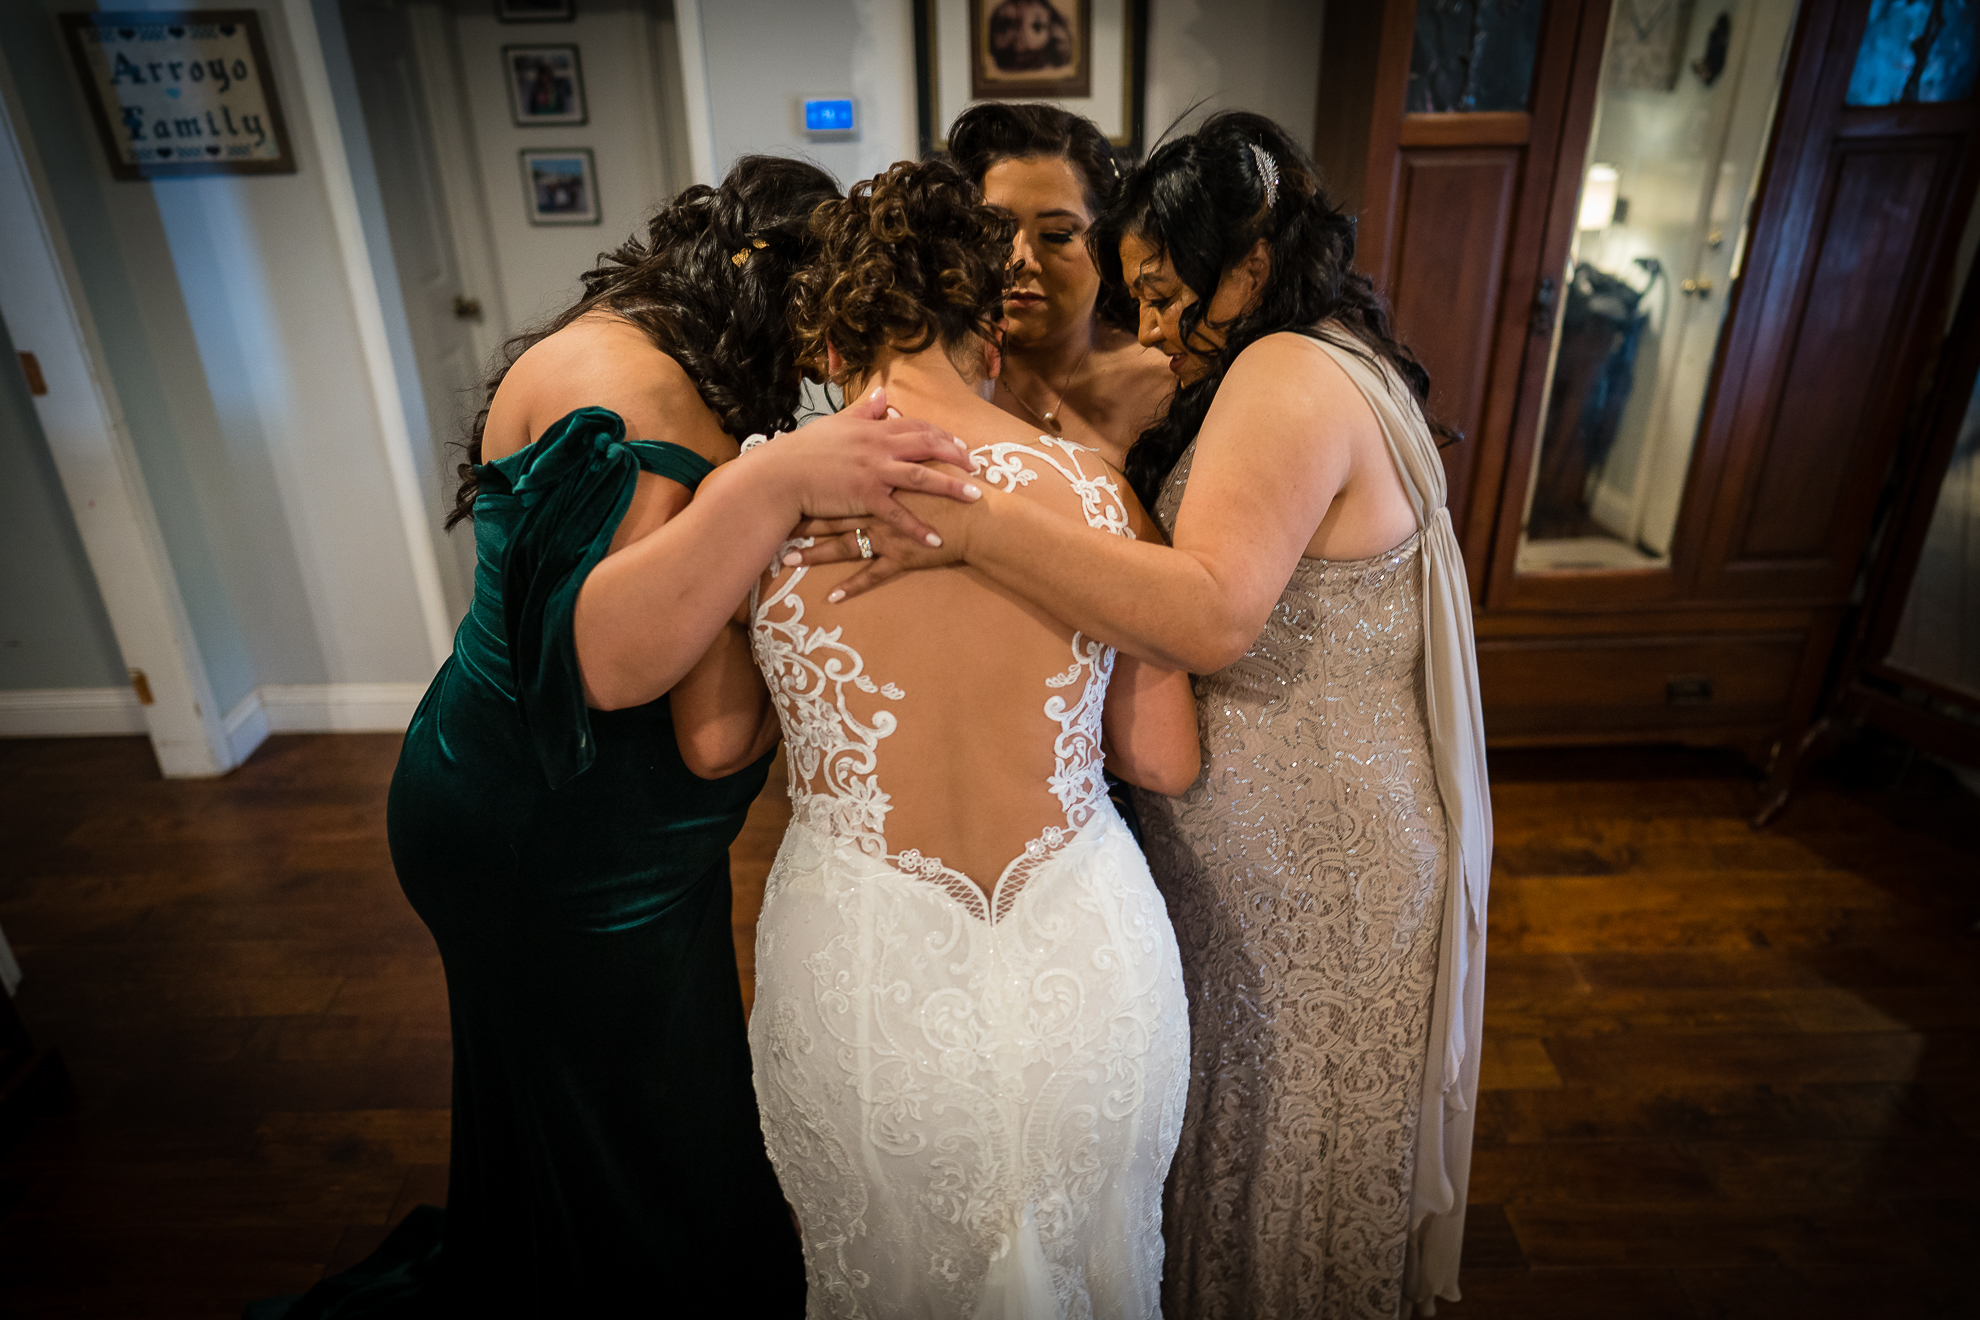 ThomasKim_photography A bride and her bridesmaids in front of a mirror at the wedding venue.